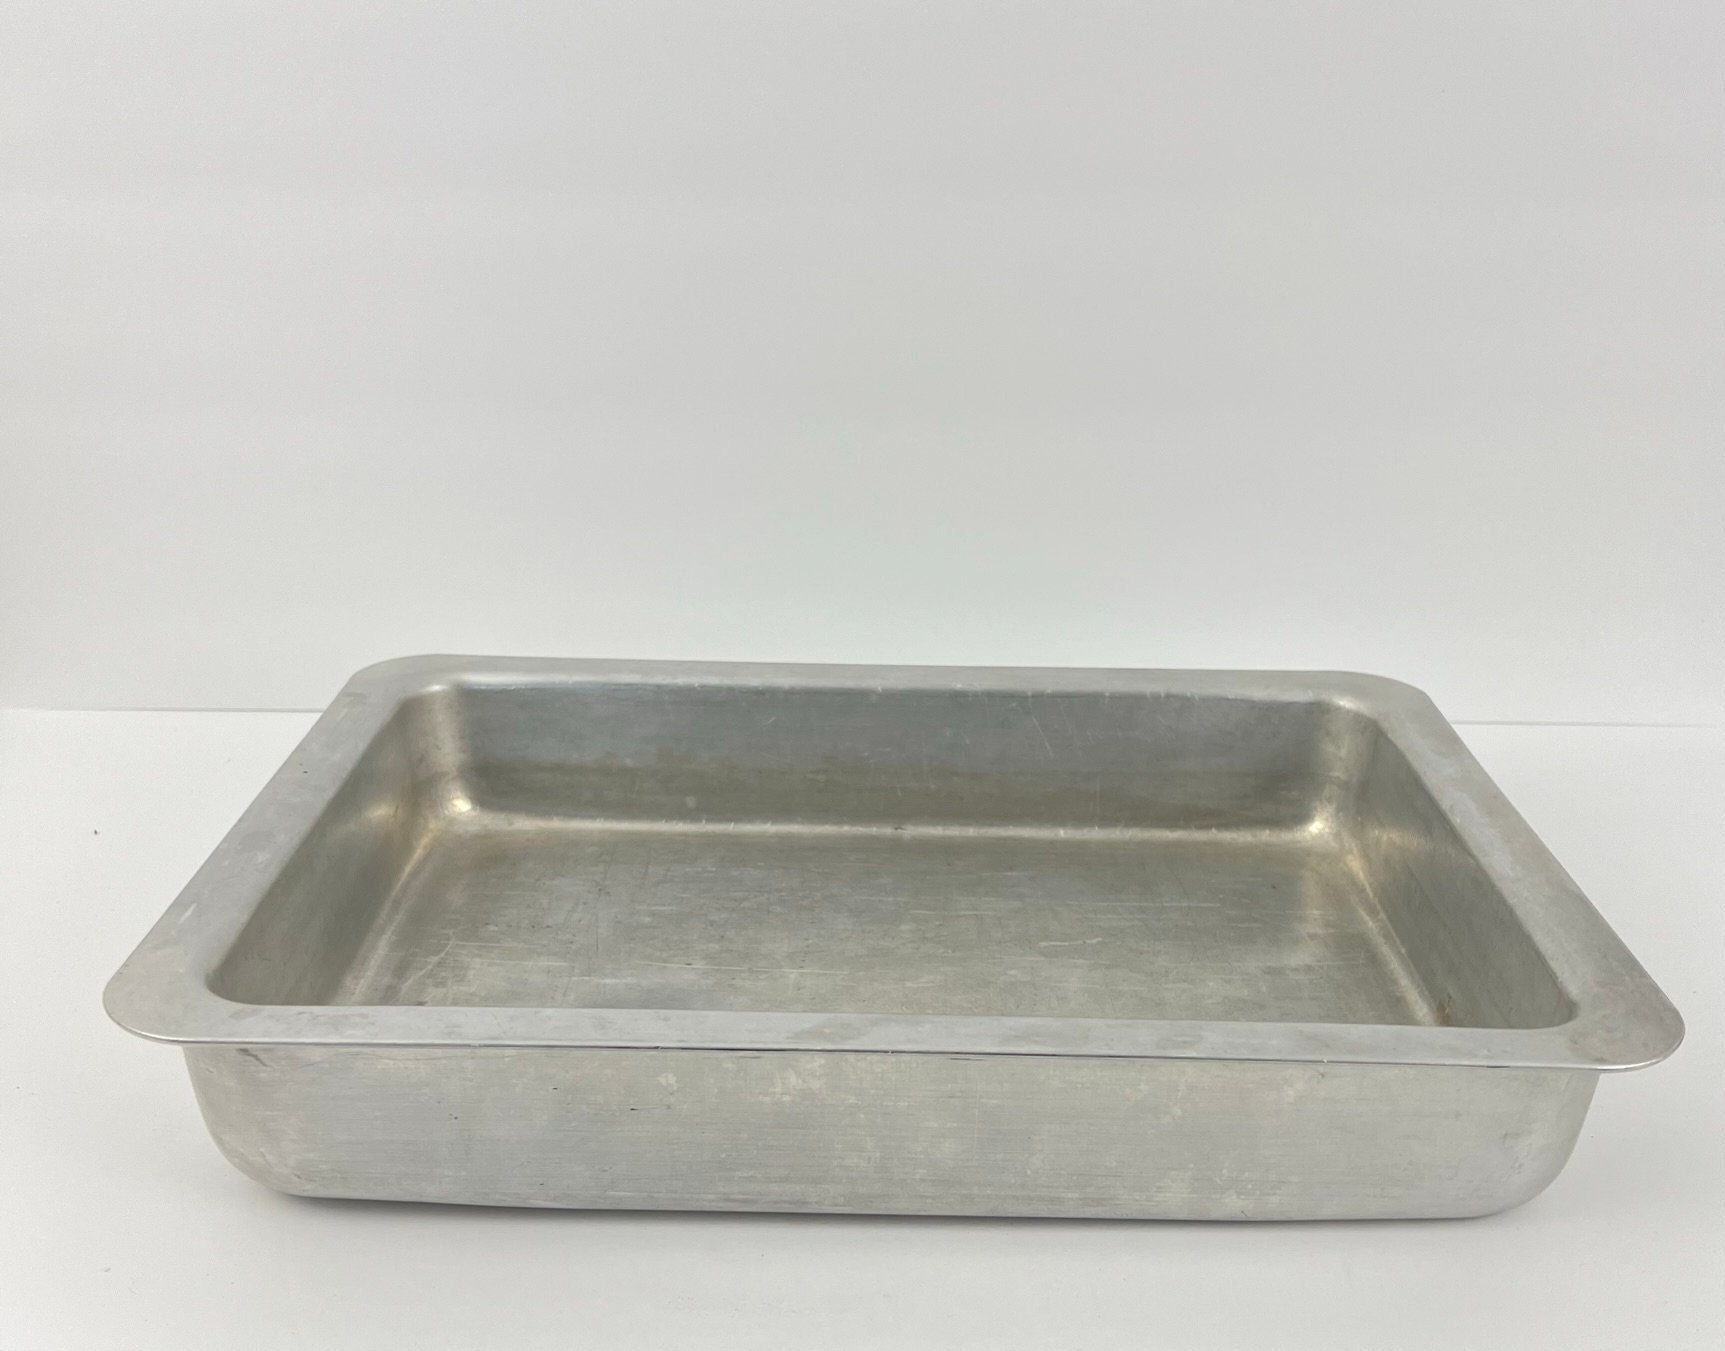 Vtg Rema Air Bake Double Wall Aluminum Cake Pan 13x9 with Clear